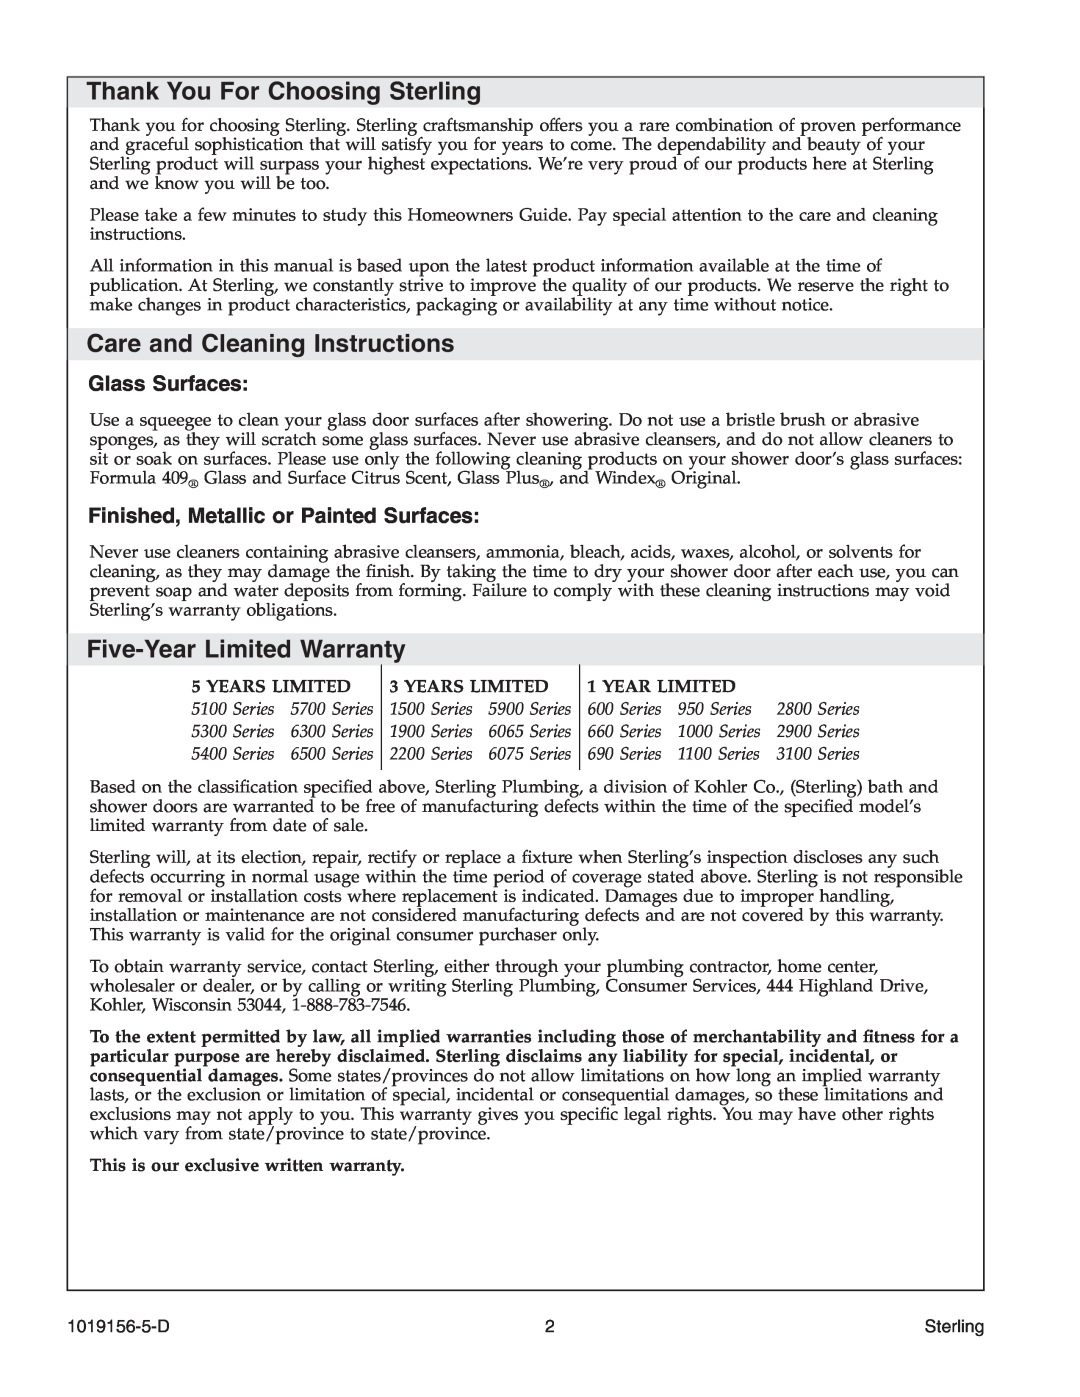 Sterling Plumbing 6305 Series Thank You For Choosing Sterling, Care and Cleaning Instructions, Five-YearLimited Warranty 